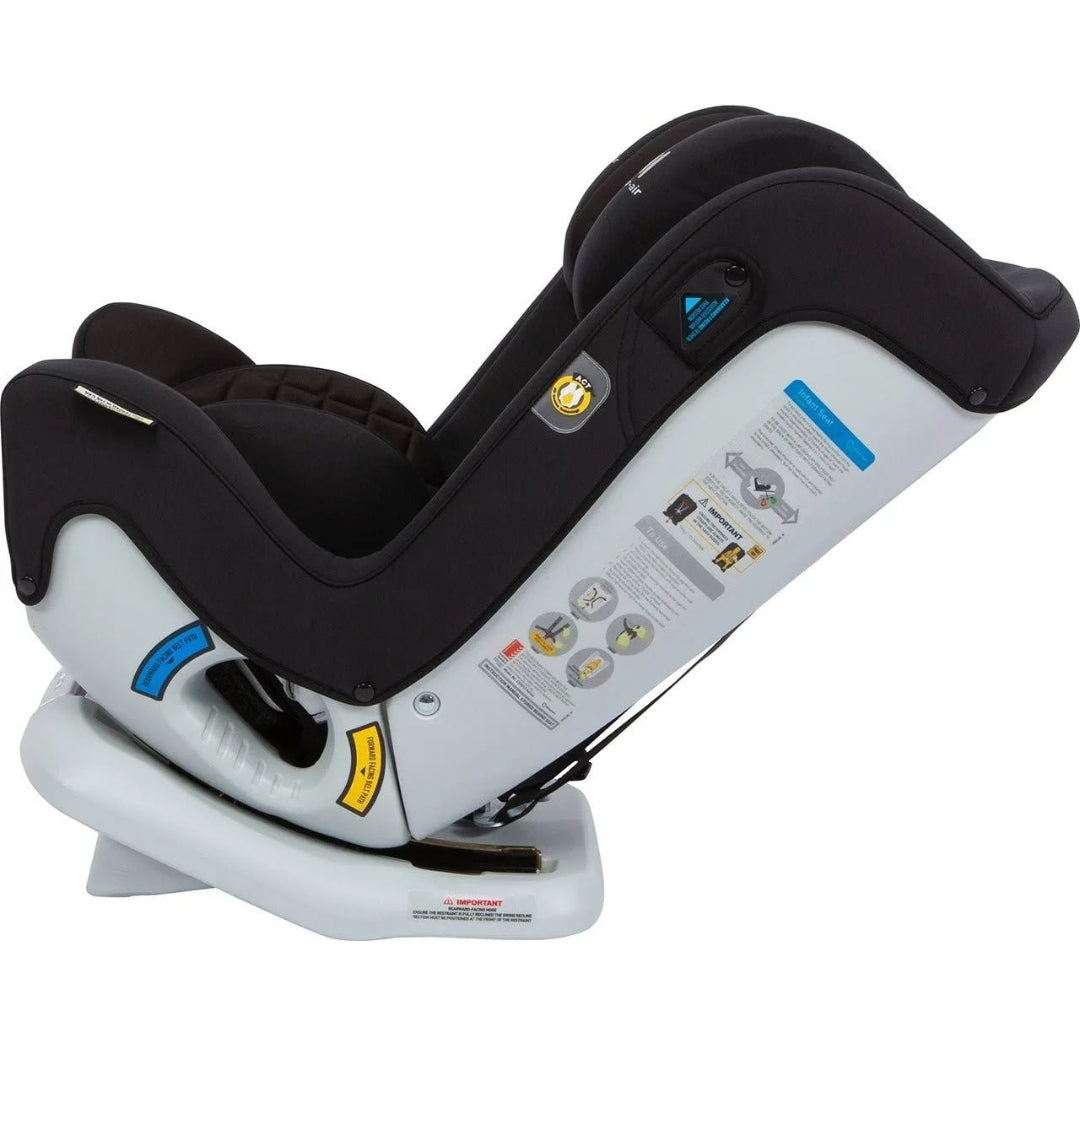 Infasecure Achieve More  Car Seat 0-8 years - ISO fix